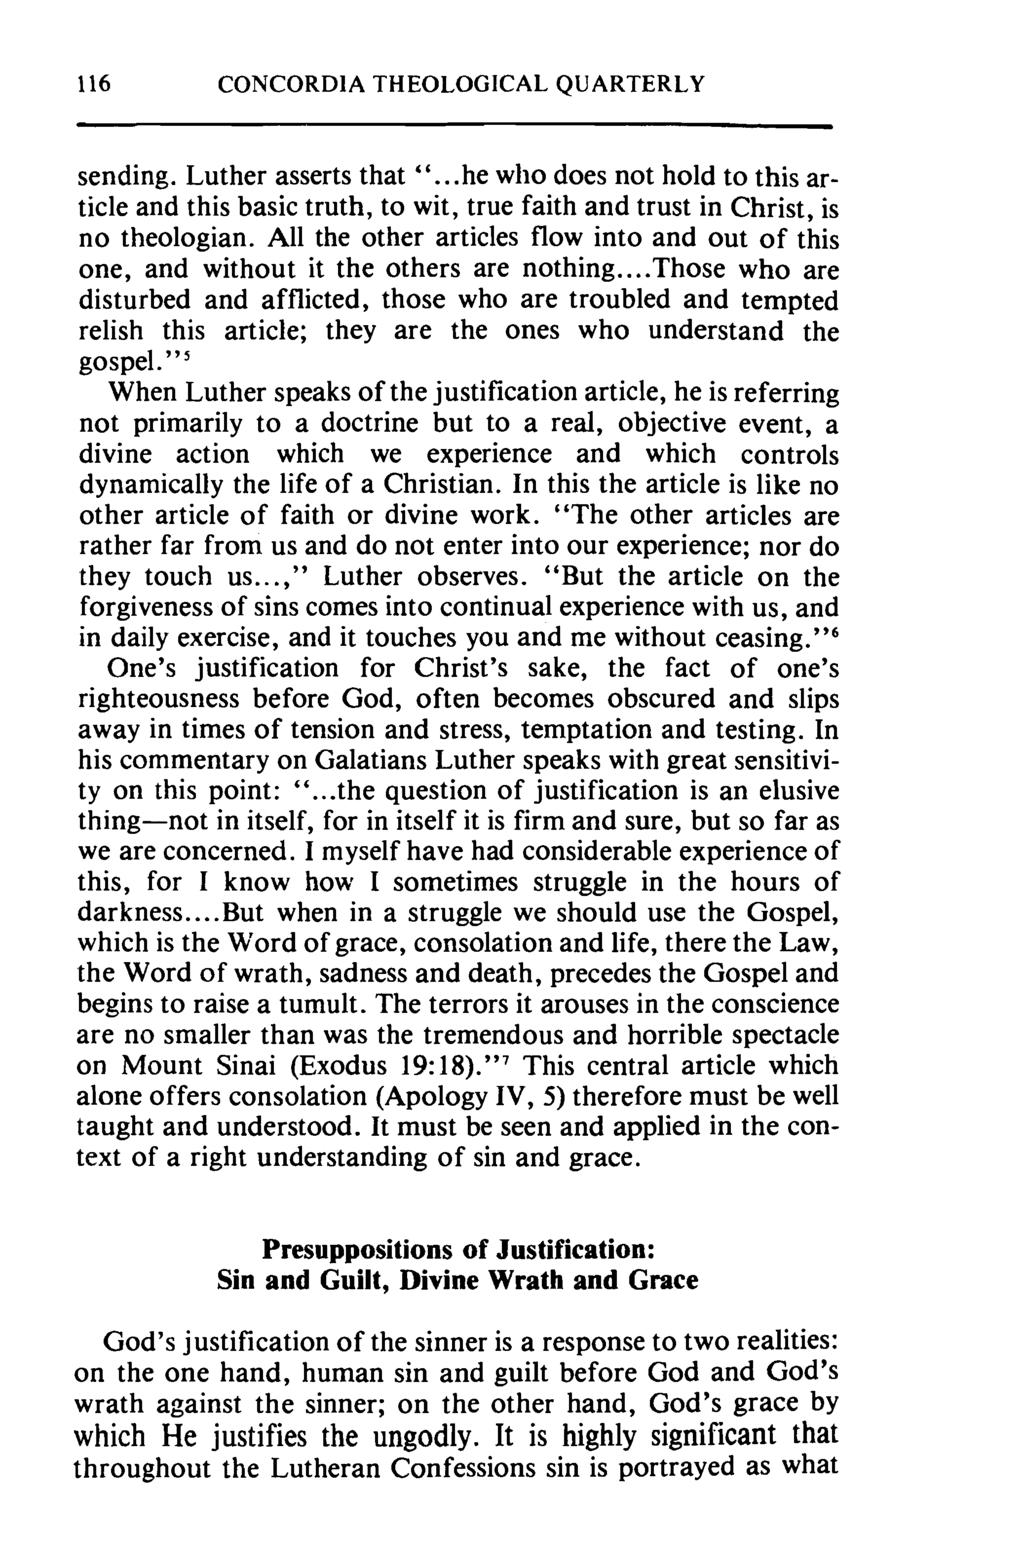 116 CONCORDlA THEOLOGICAL QUARTERLY sending. Luther asserts that "...he who does not hold to this article and this basic truth, to wit, true faith and trust in Christ, is no theologian.